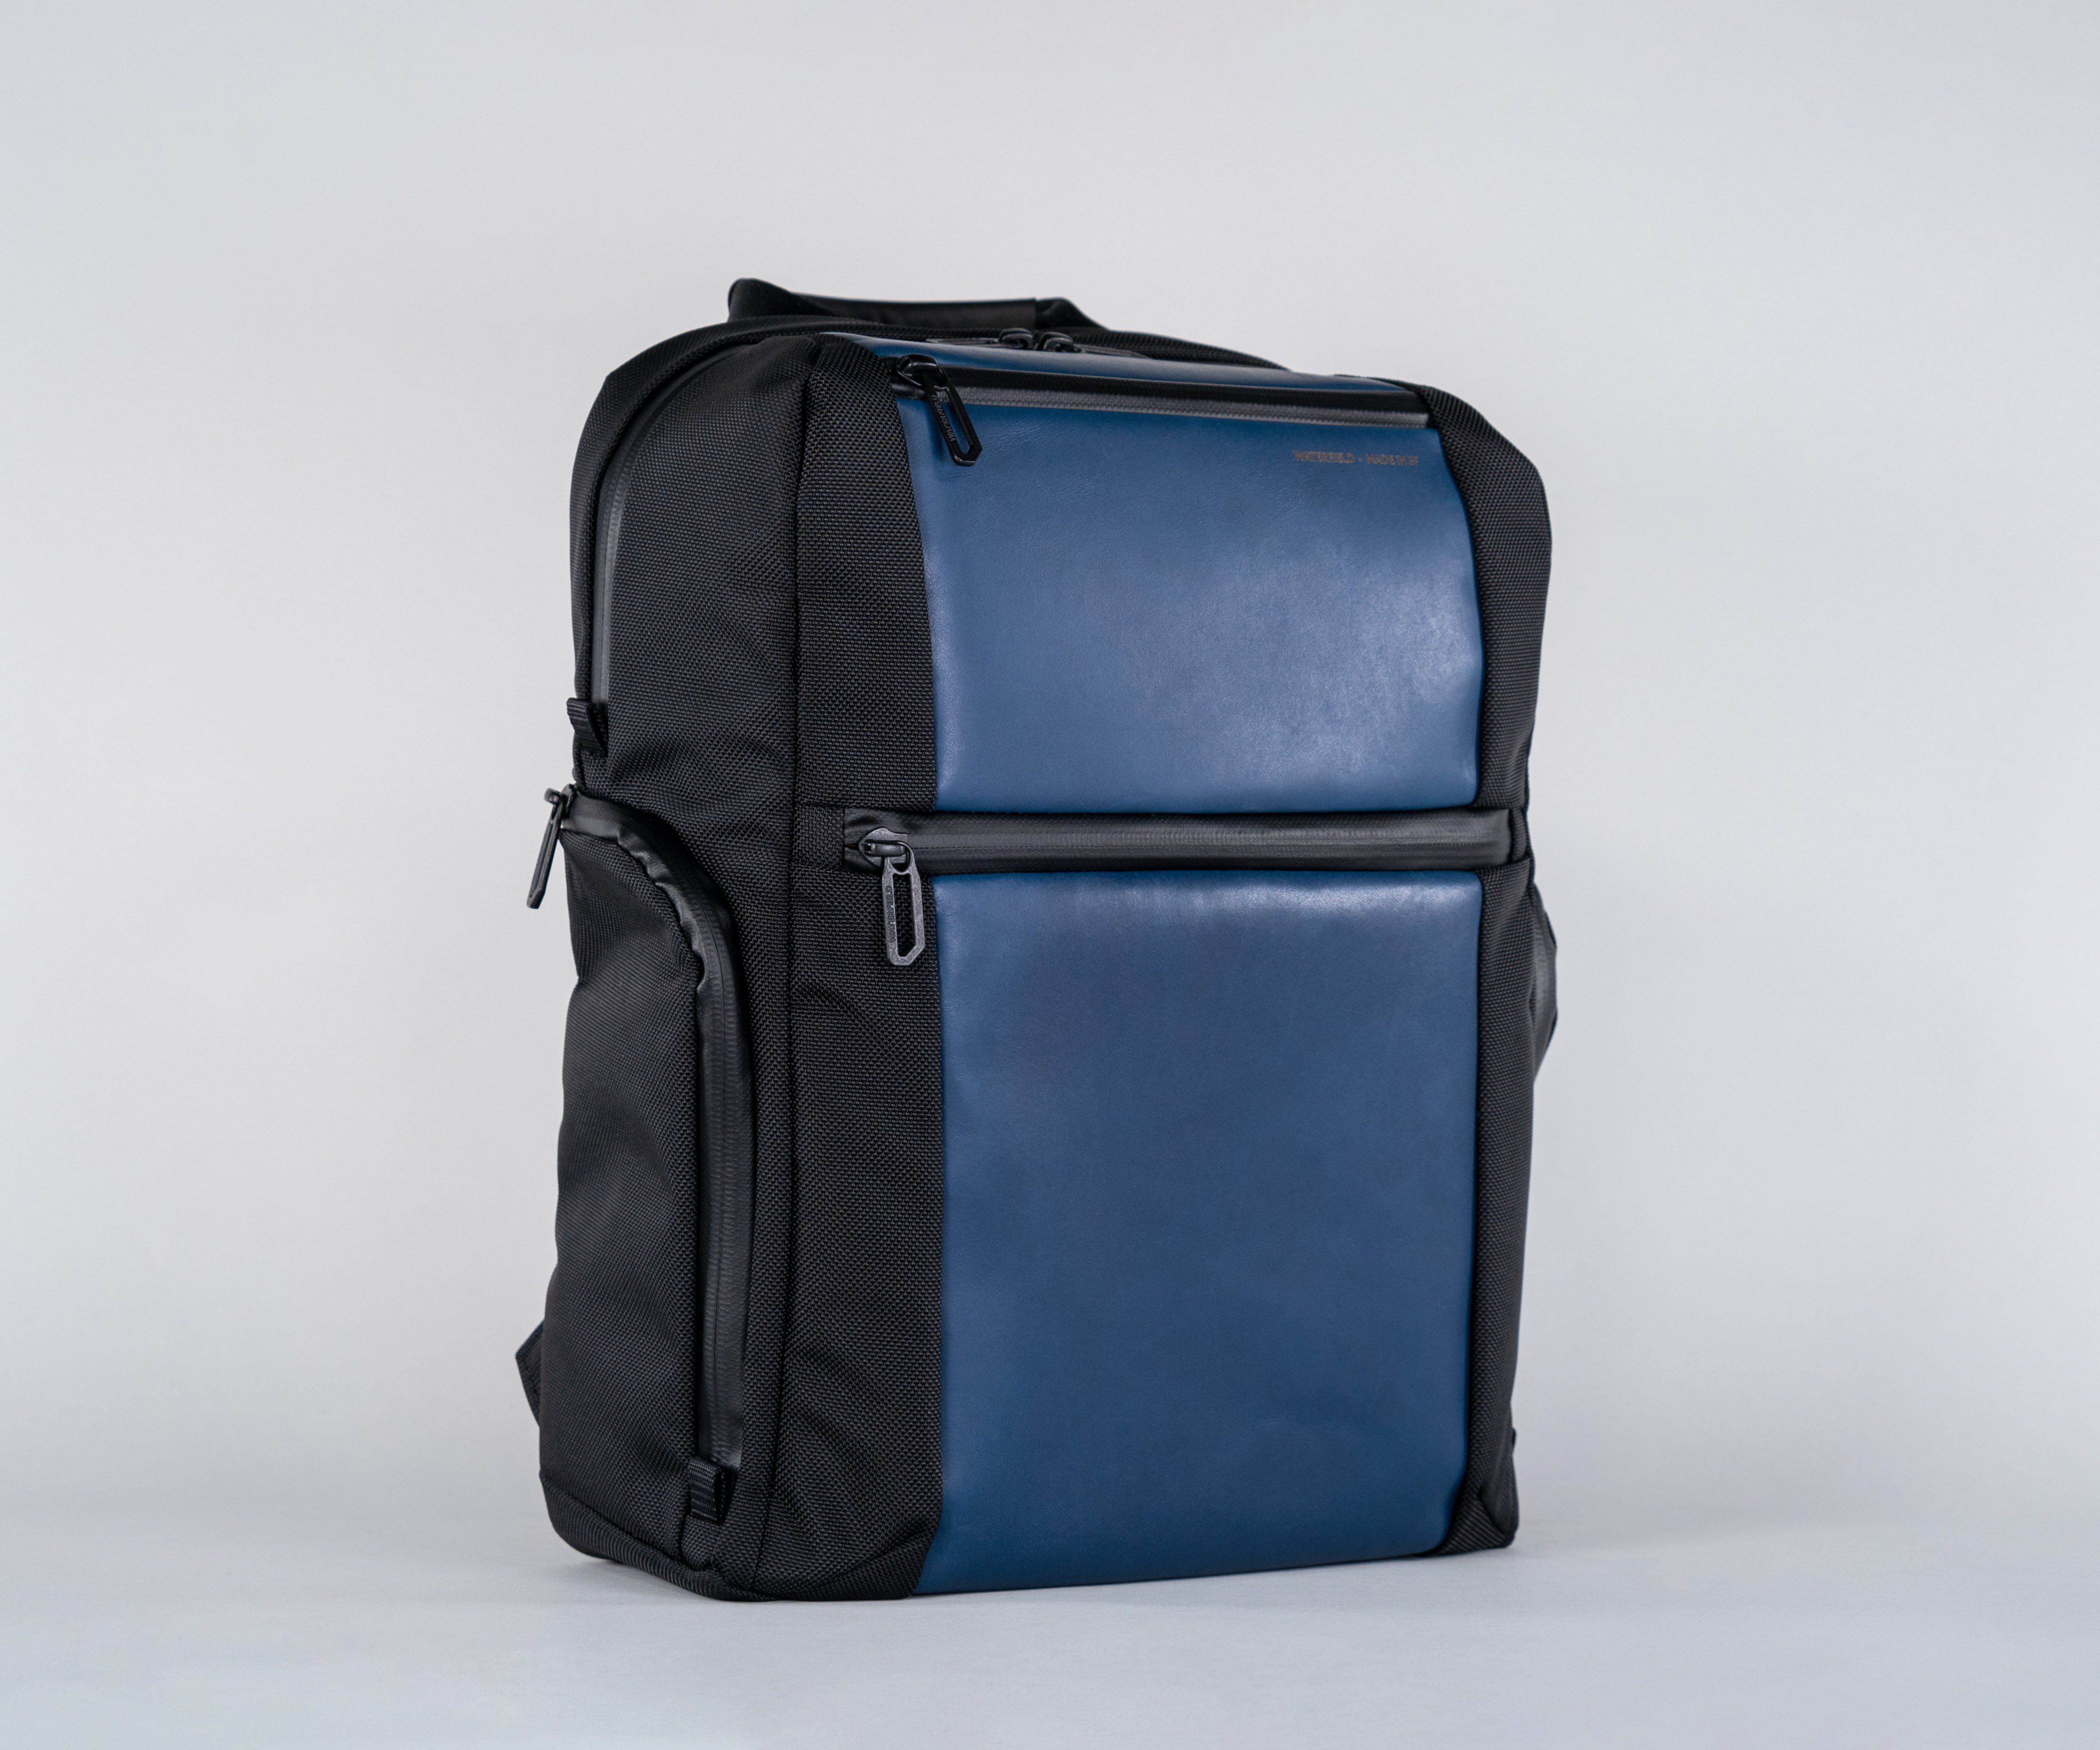 Black ballistic and blue full-grain leather colorway